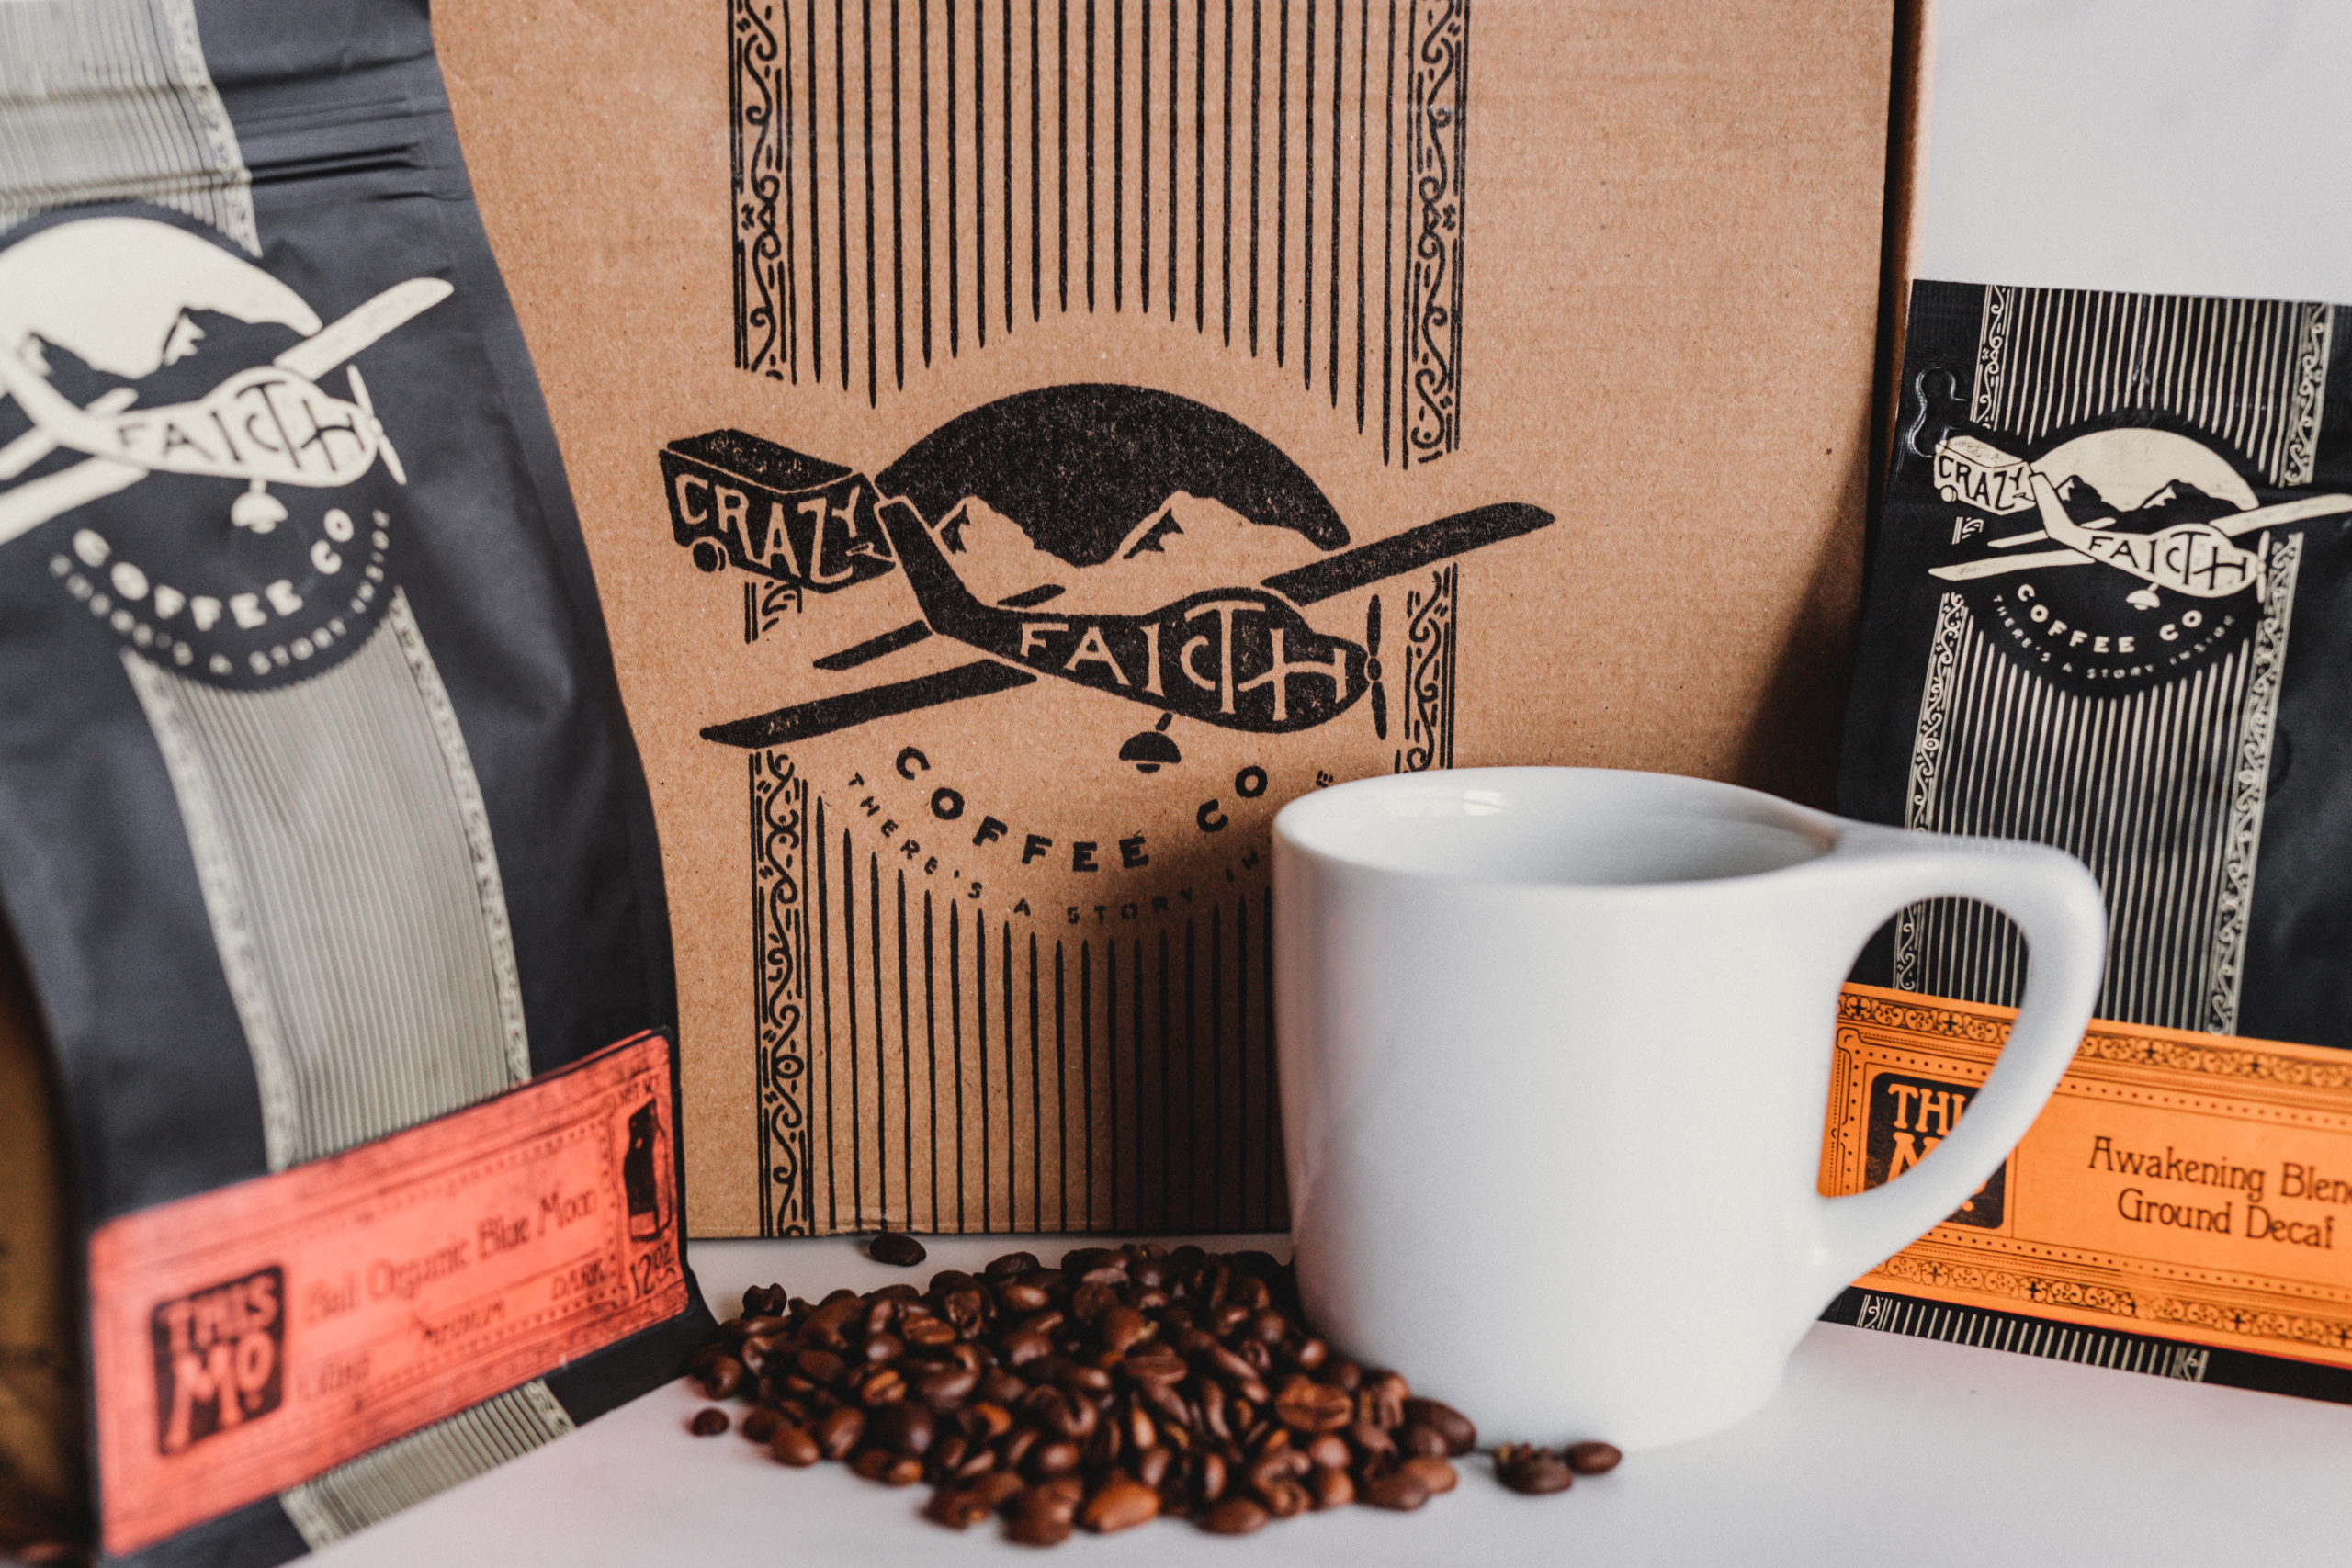 JSM Packages of Bali Organic Blue Moon and Awakening Blend Ground Decaf coffee beans with a box in the background as well as coffee beans and white coffee cup